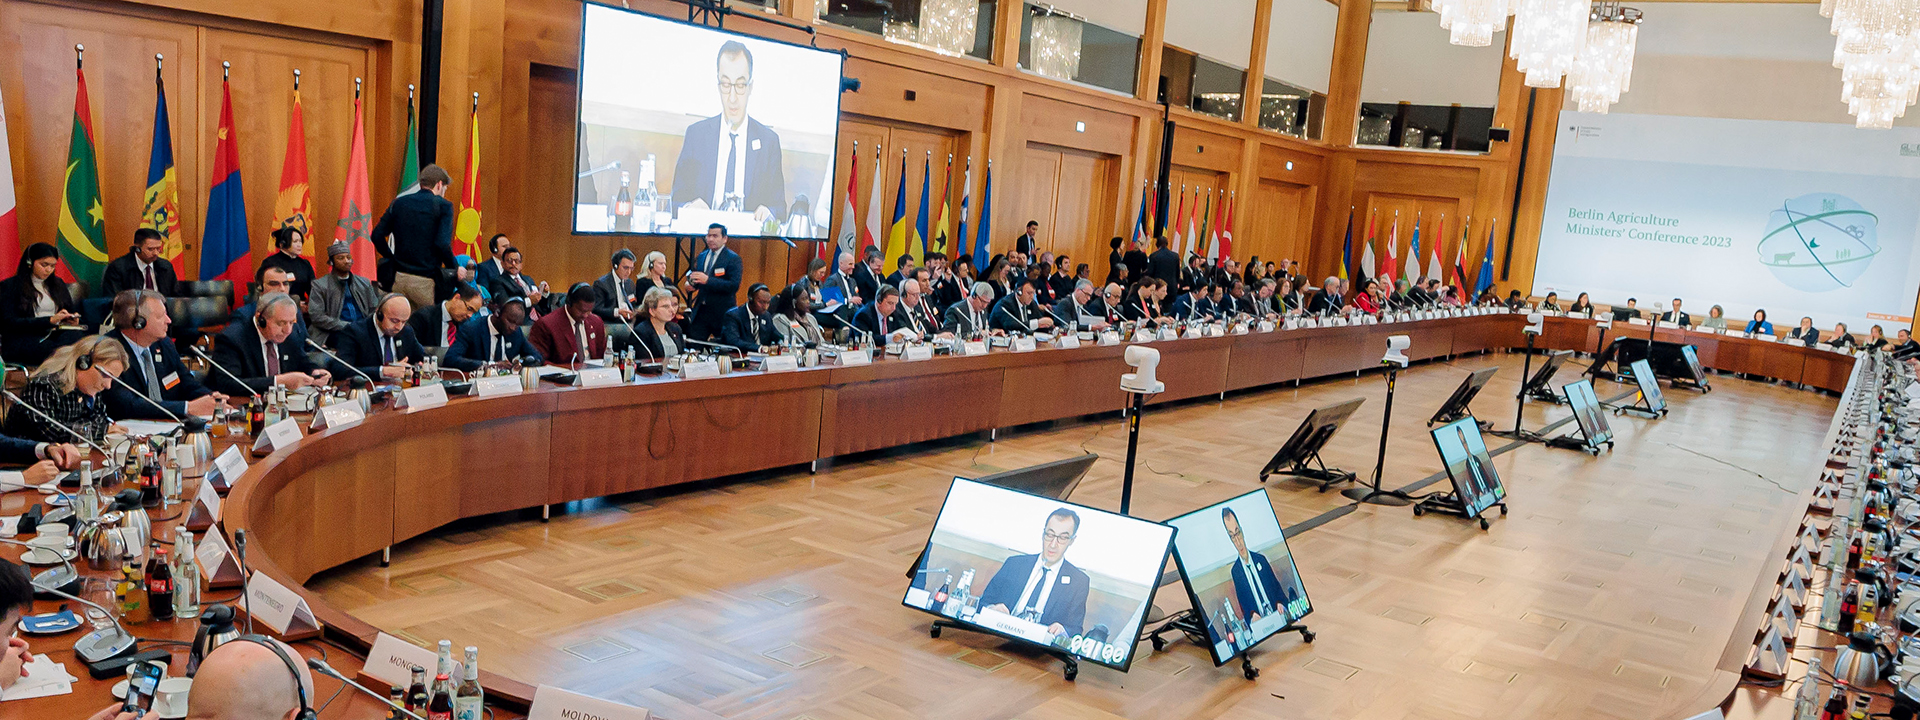 Berlin Agriculture Ministers’ Conference